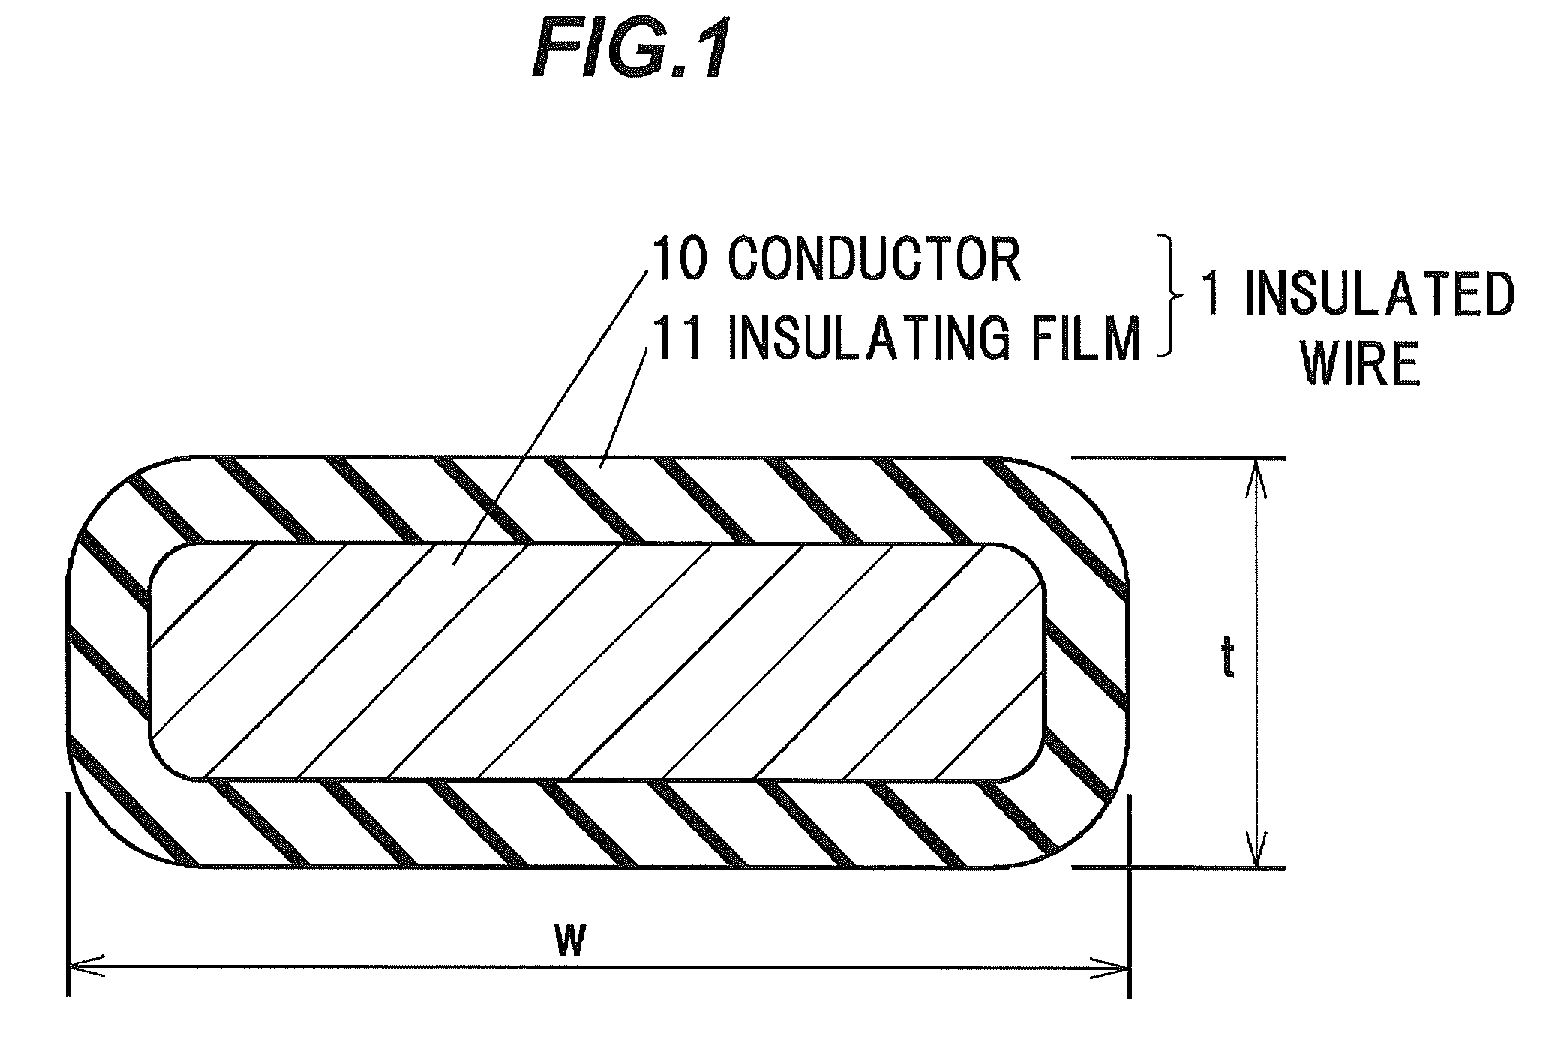 Insulated wire and coil formed by using the same